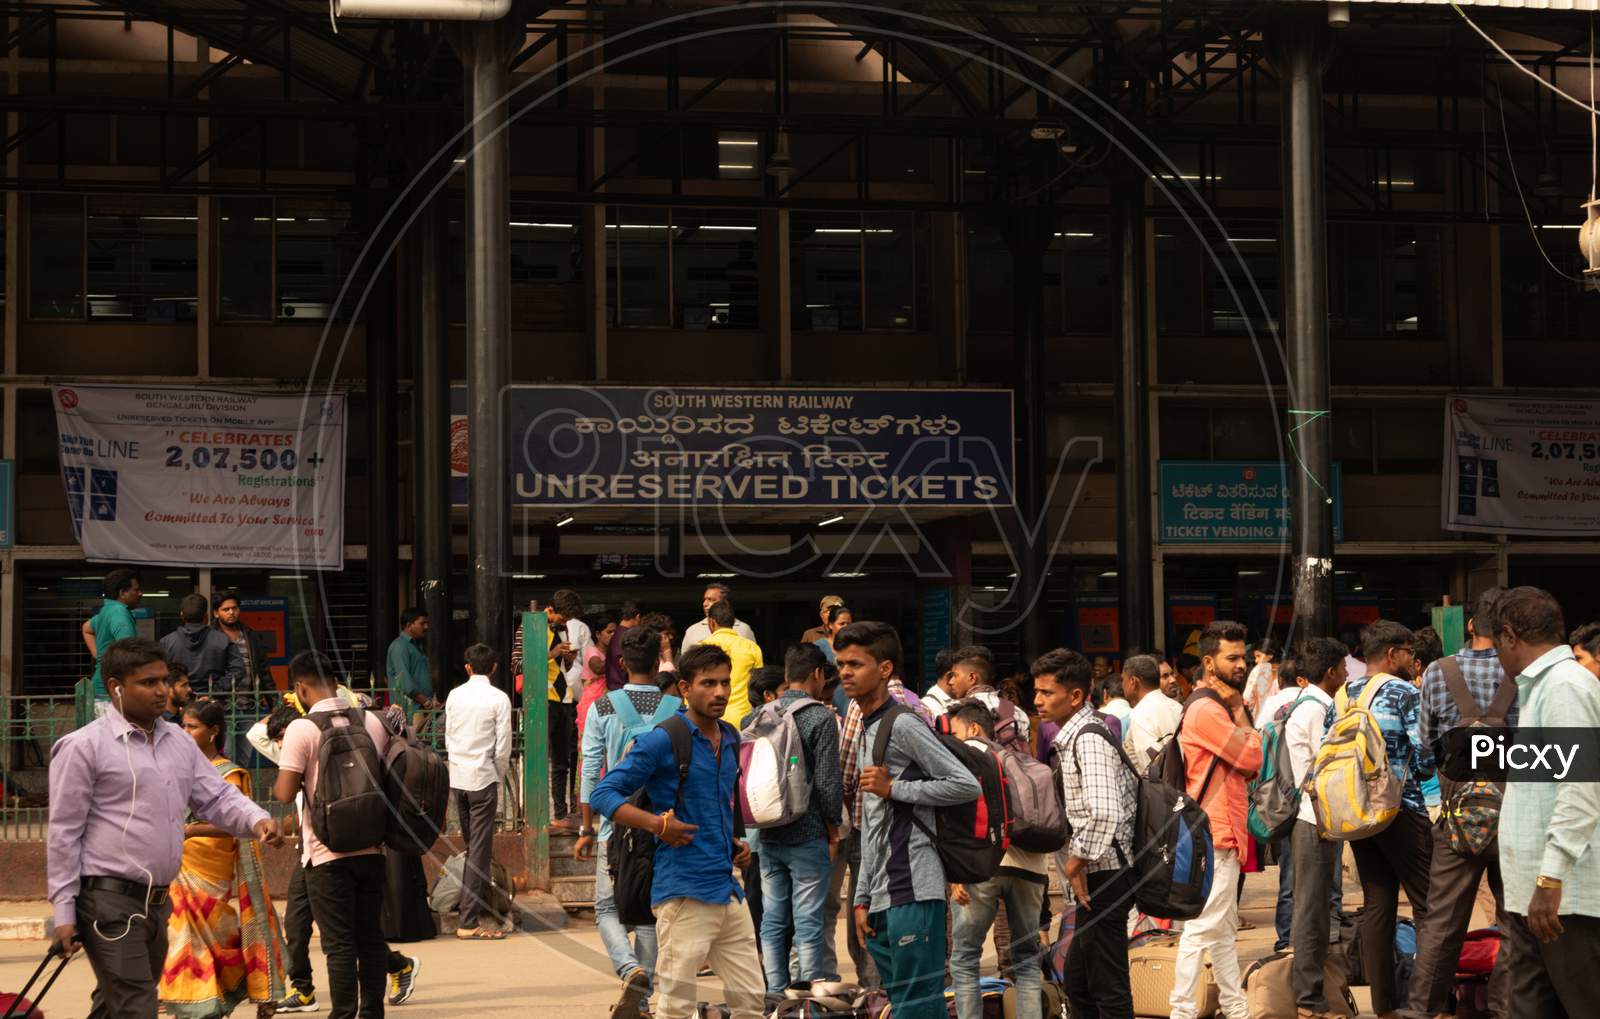 Bangalore India - June 3, 2019: Crowd Outside The Ticket Counter At Railway Station During Festival Time